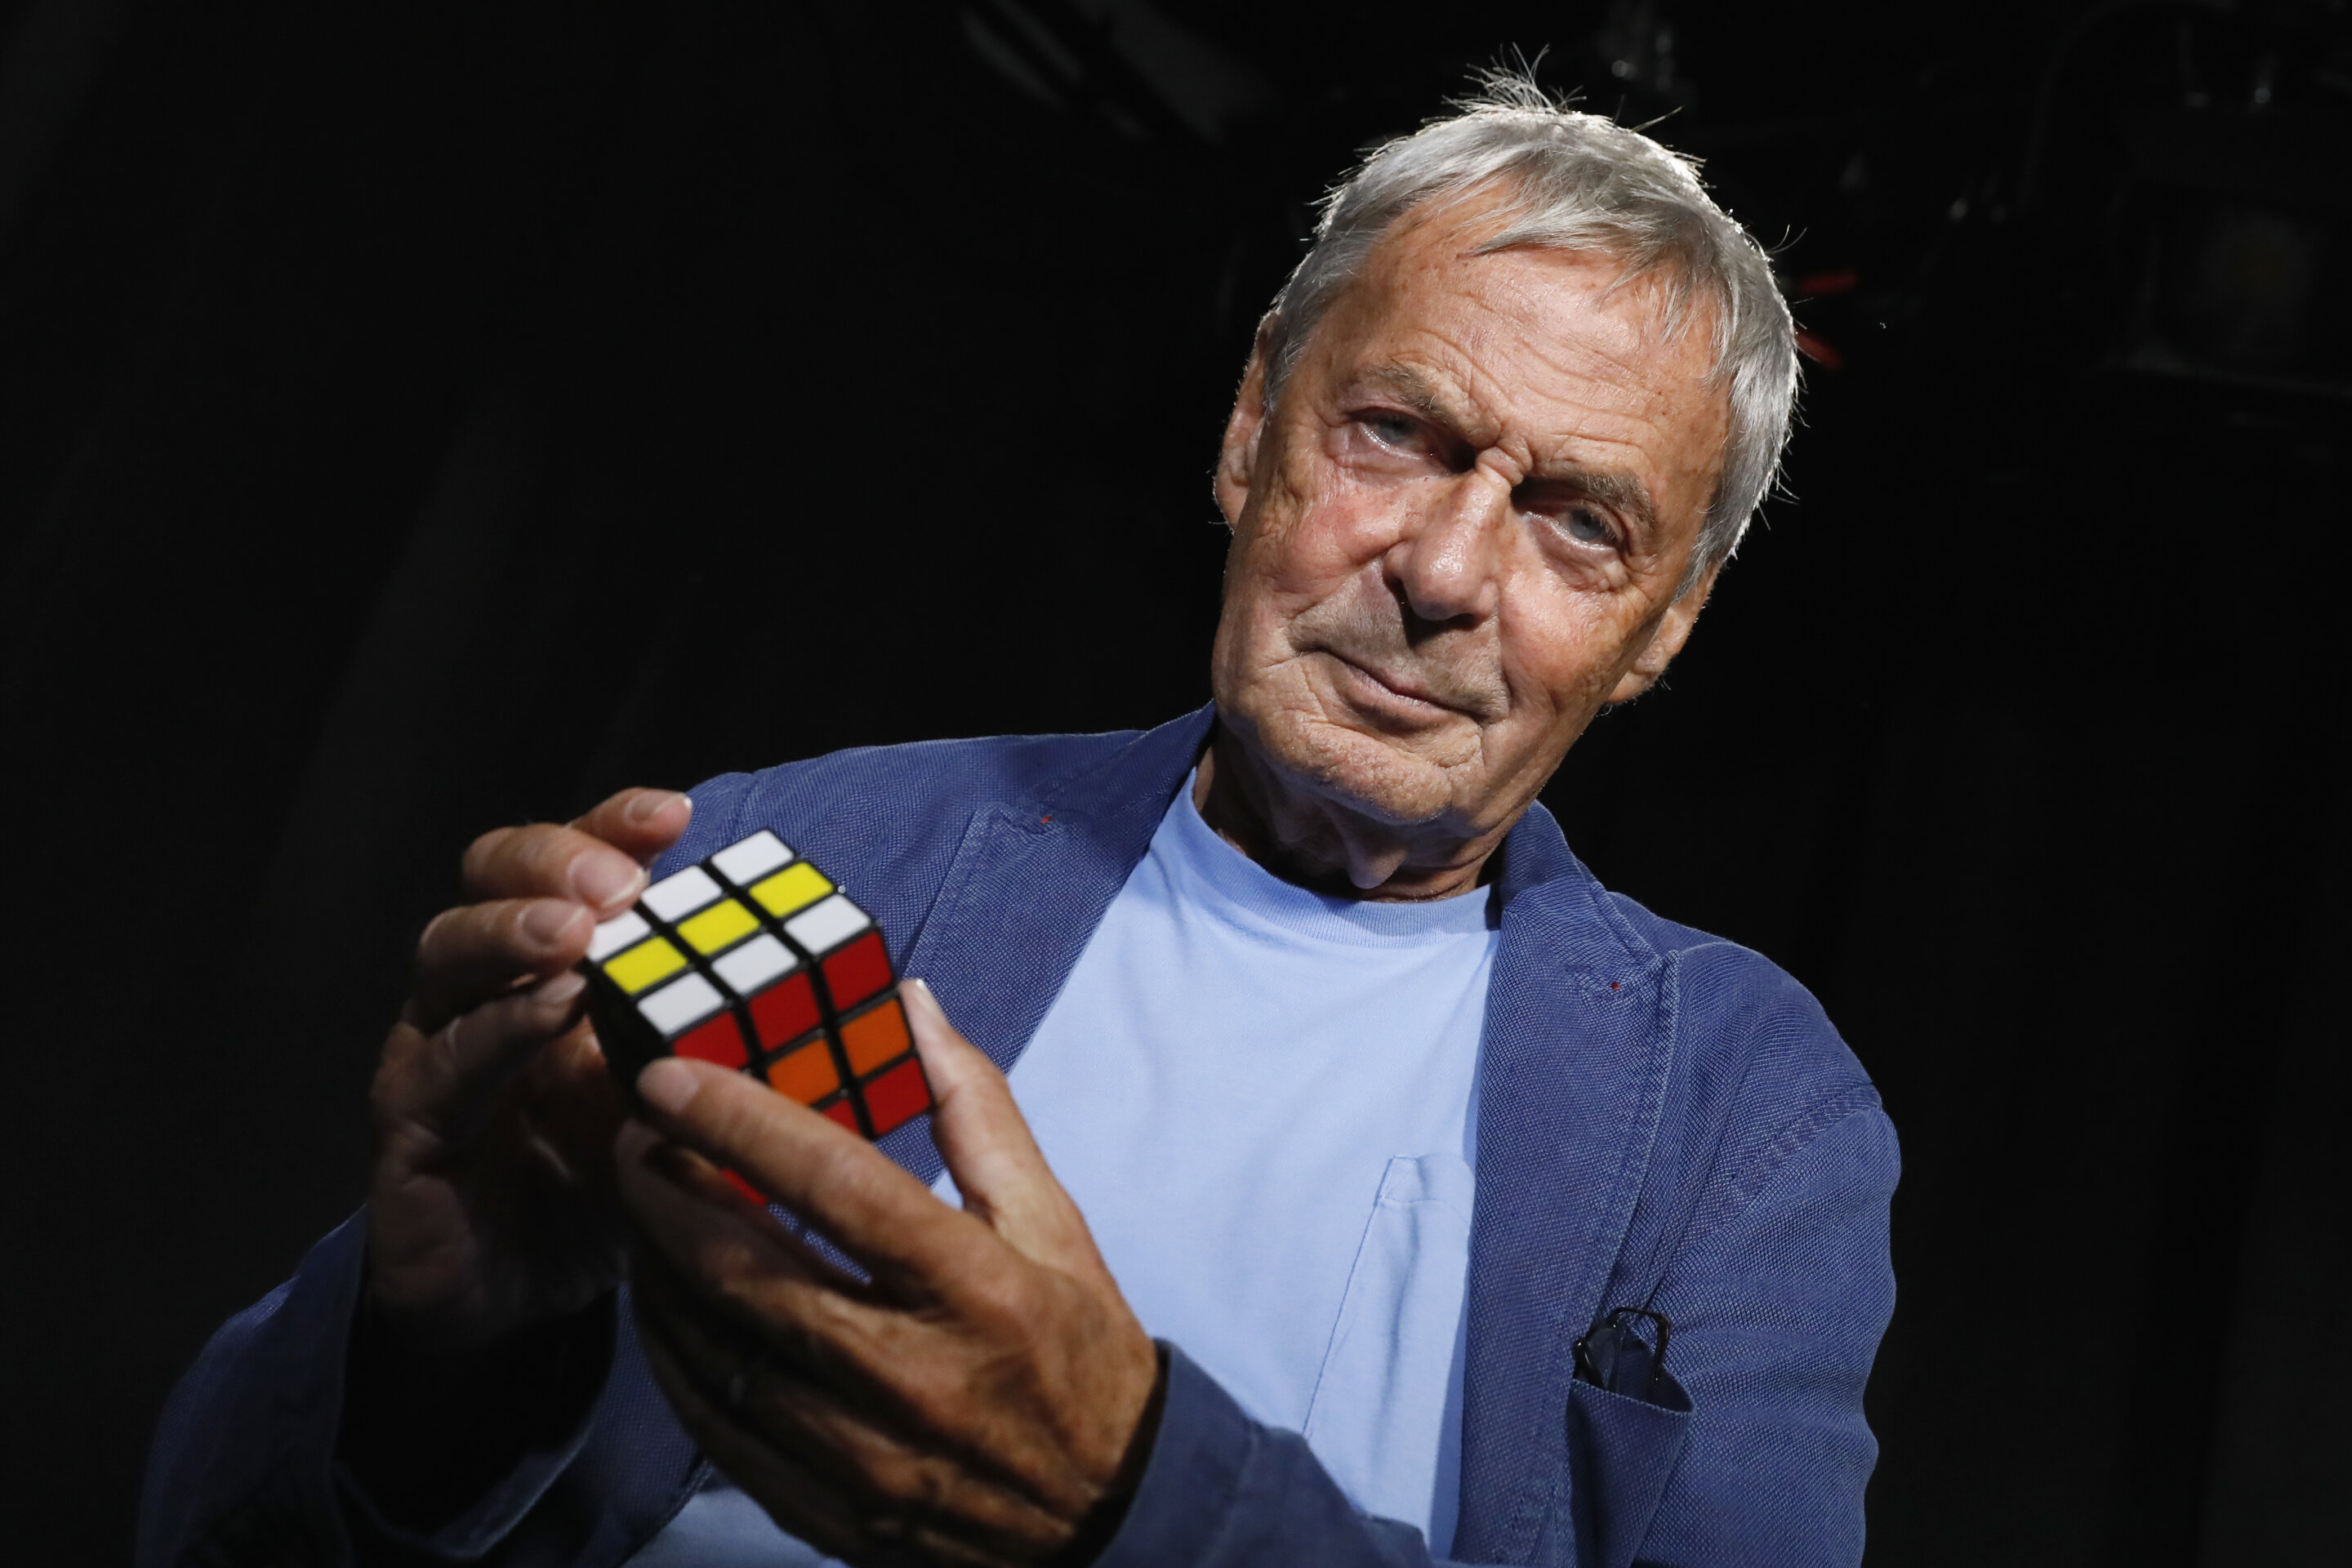 The mind behind the Rubik's Cube celebrates a lasting puzzle